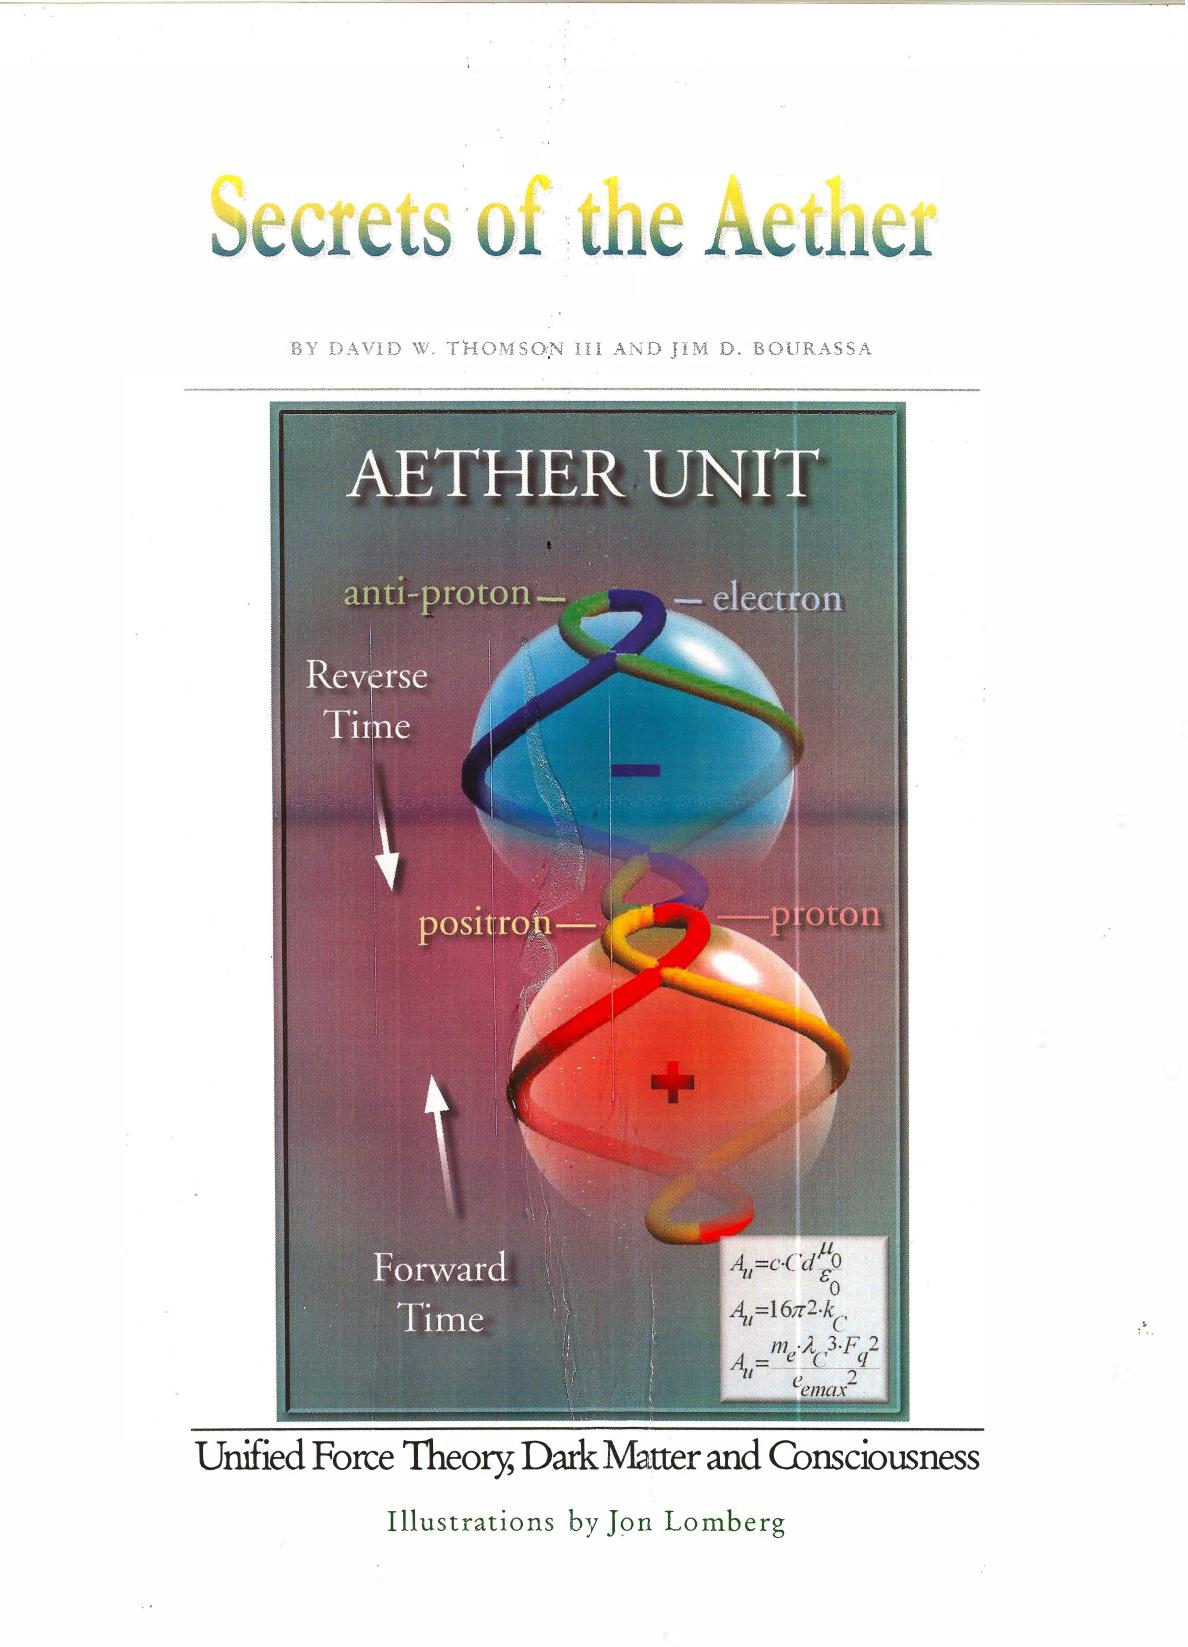 Secrets of the Aether Unified Force Theory, Dark Matter and Consciousness